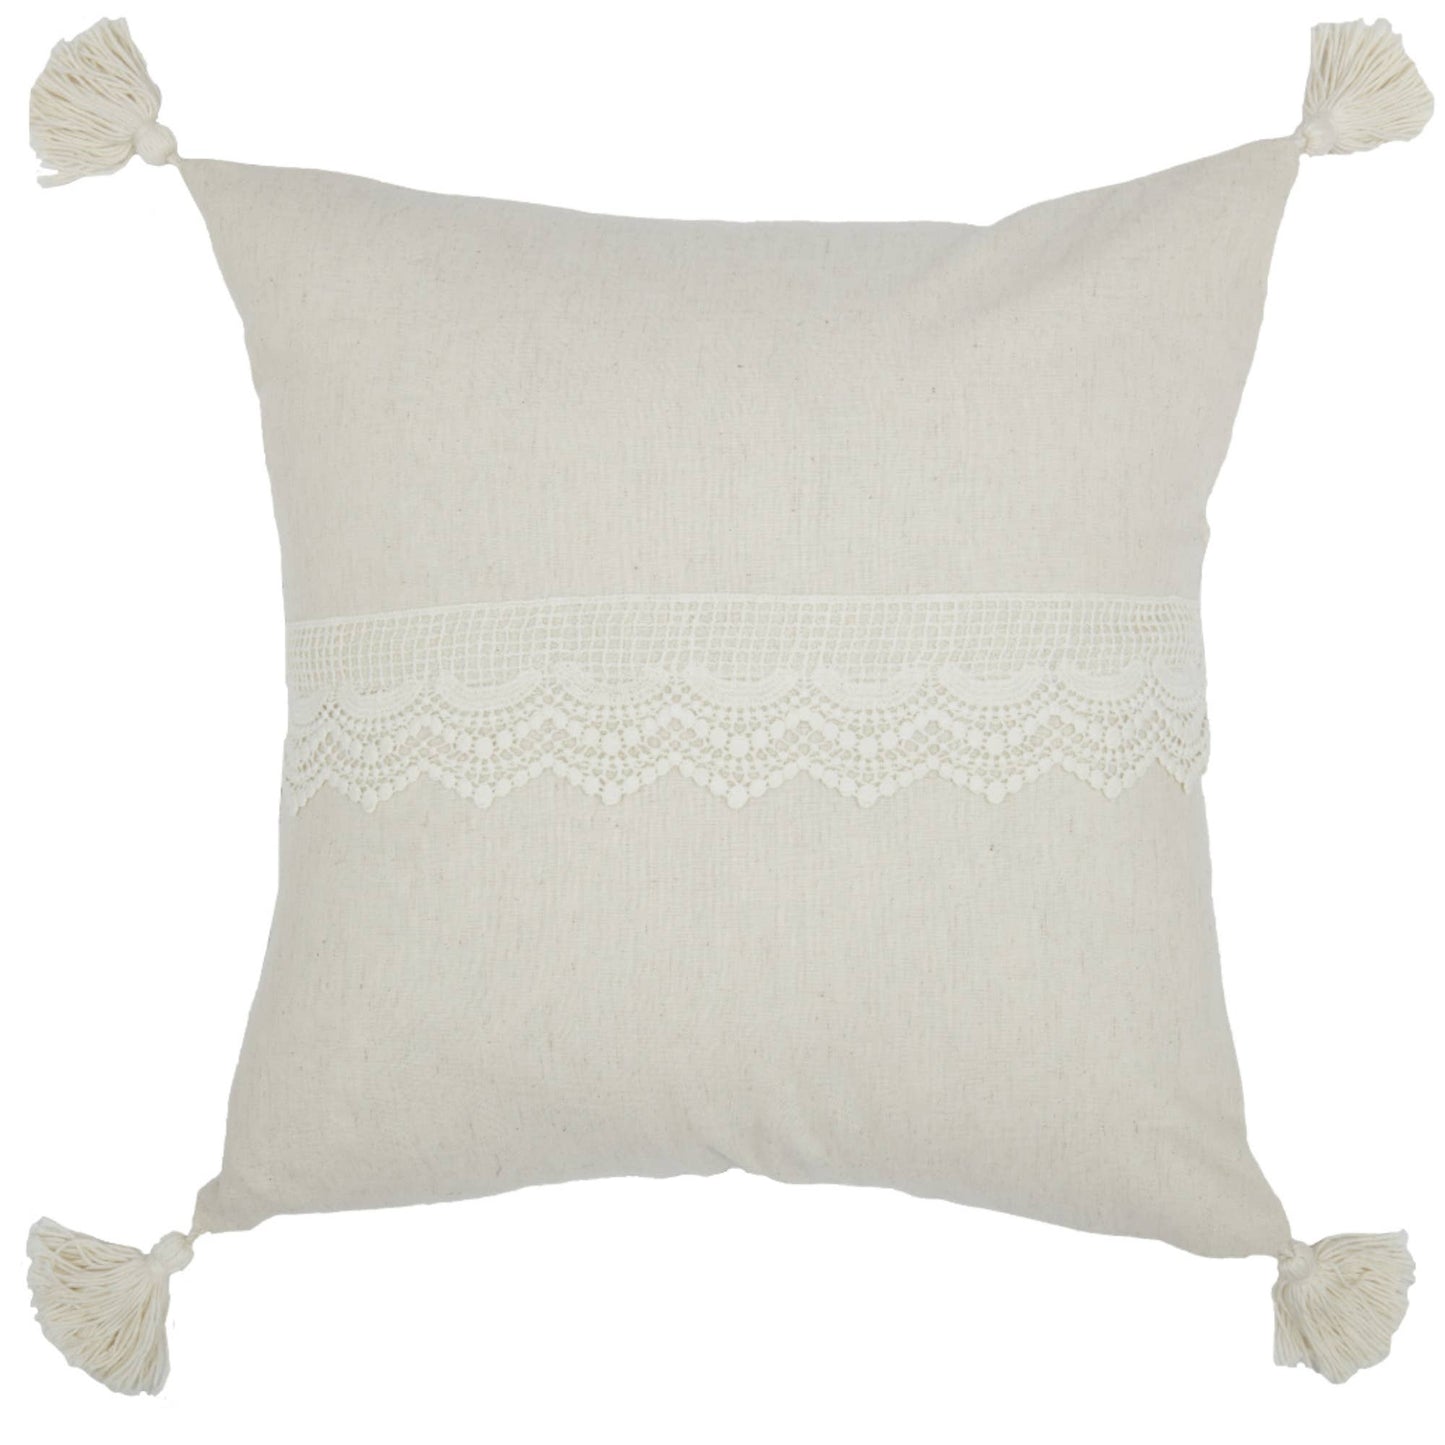 Flax and Lace Pillow Cover 20Lx20W